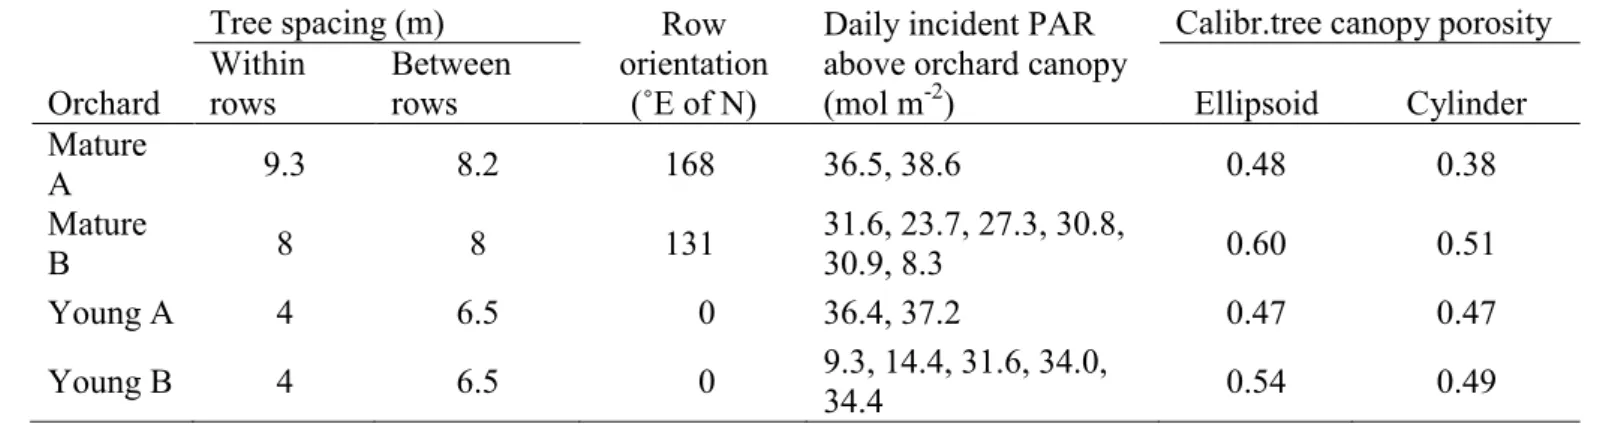 Table 1. Tree spacing, row orientation, daily incident PAR in the different measuring days, and 596 